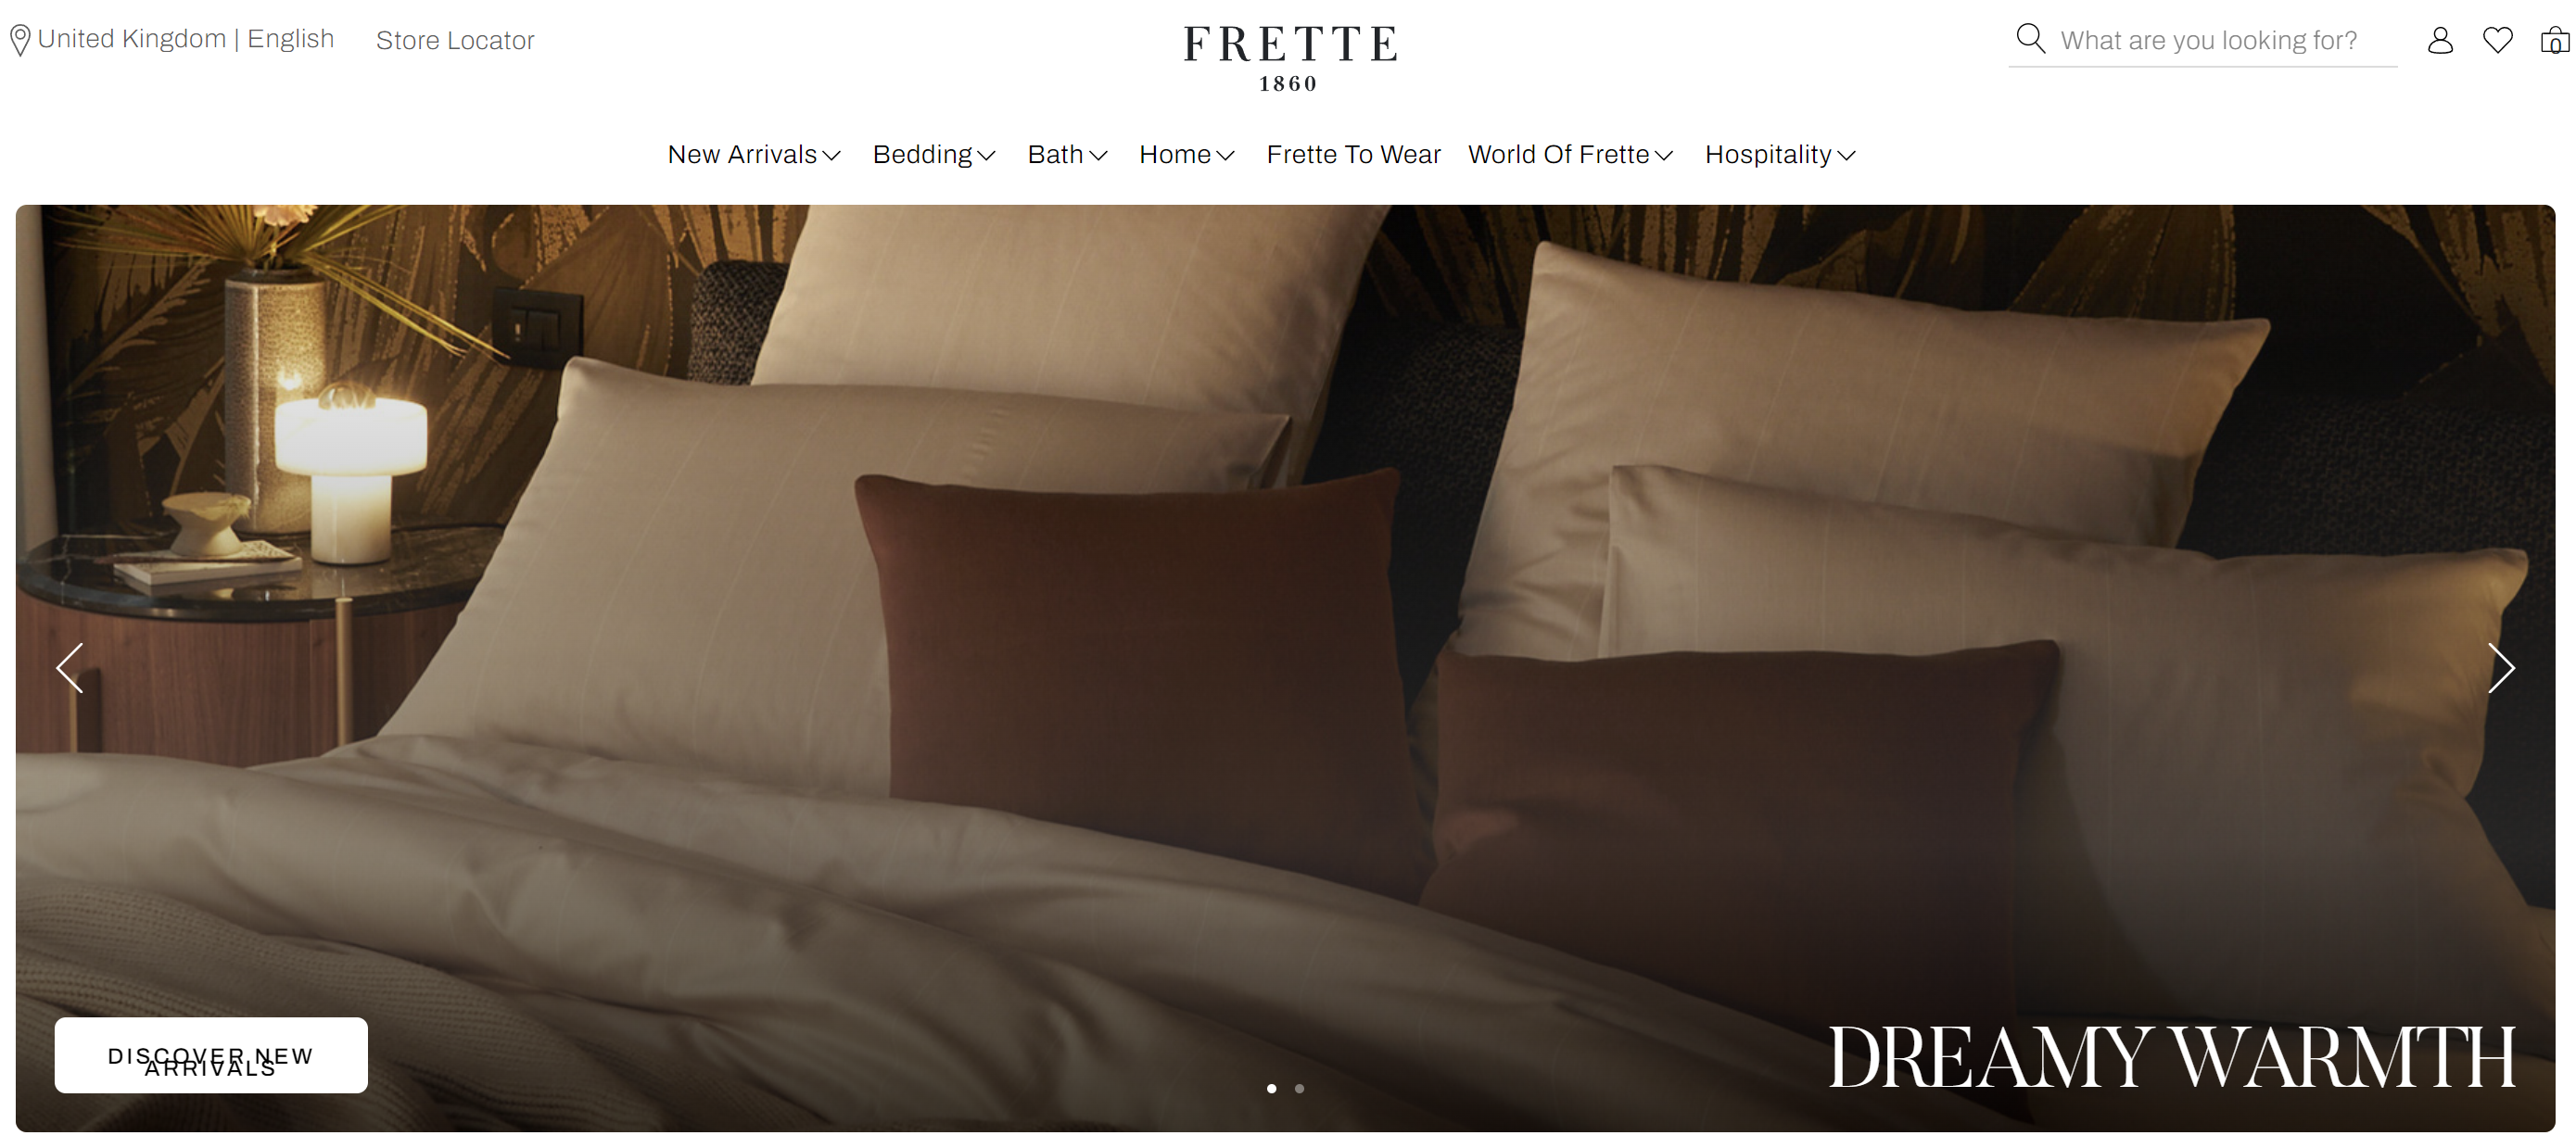 Italian luxury bedding brand Frette acquired by a Chinese consortium led by ANTA’s Chairman for 200 million euros